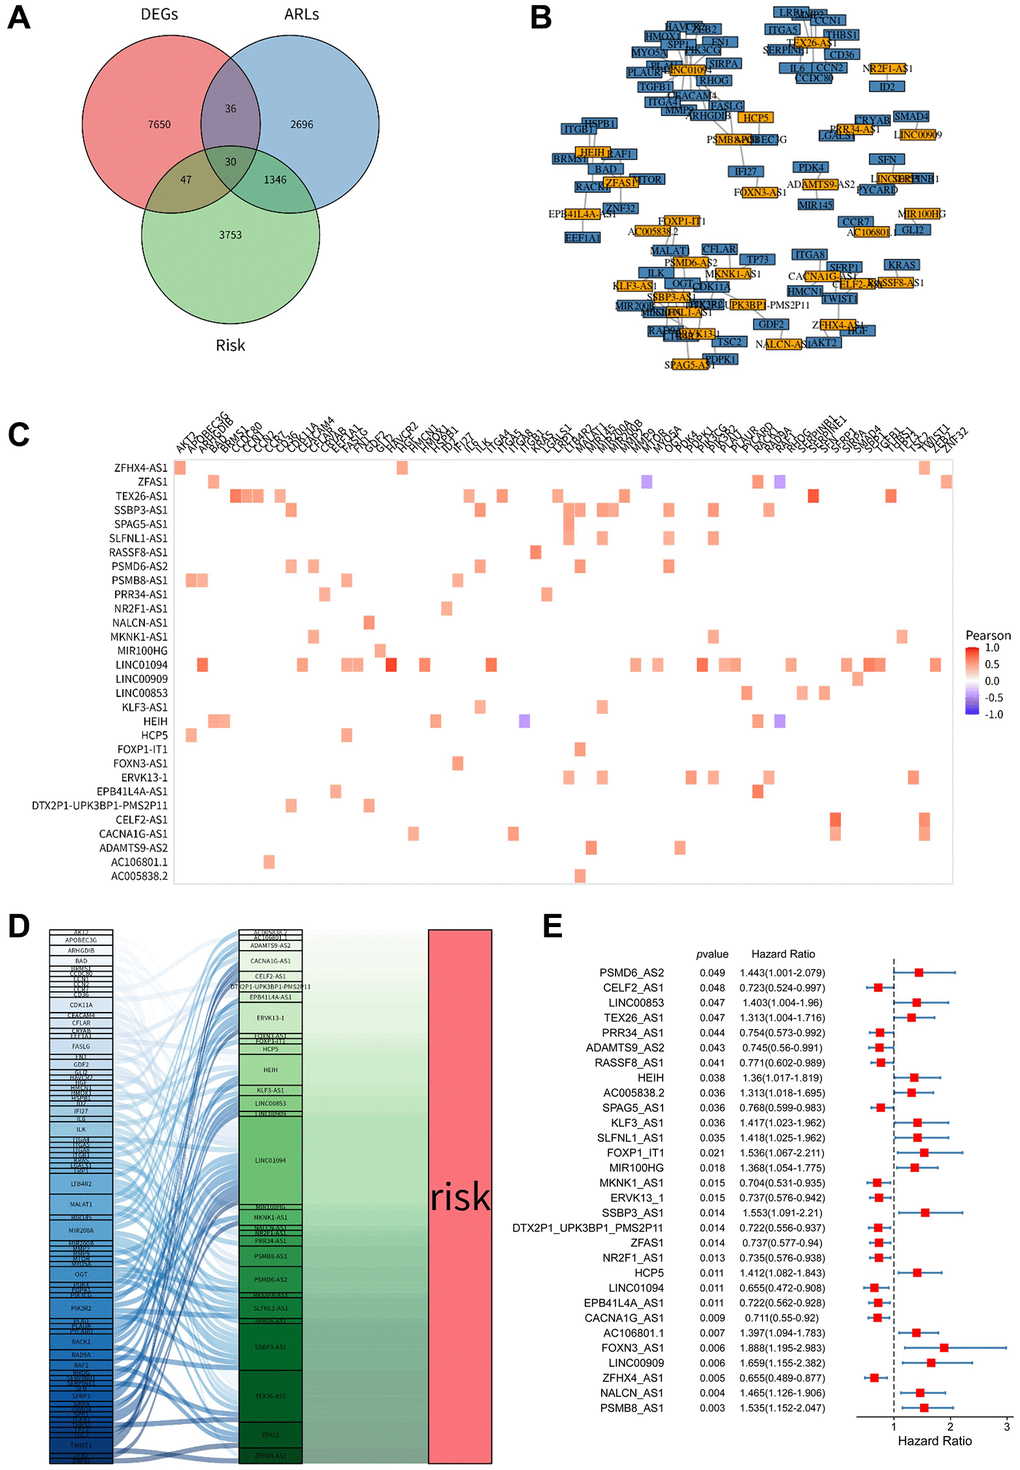 Identification of anoikis-related lncRNAs in ovarian cancer (OV). (A) Venn diagram showing the 30 lncRNAs identified through the intersection of differentially expressed lncRNAs, Kaplan-Meier survival analysis, and lncRNAs associated with ARGs. (B) Coexpression network depicting the relationship between the 30 differentially expressed lncRNAs, DEGs (differentially expressed genes), and ARLs (anoikis-related lncRNAs) based on Pearson's correlation coefficient (R > 0.4, p C) Correlation heatmap illustrating the correlation between the 30 lncRNAs and ARGs. The color intensity represents the strength of the correlation. (D) Sankey diagram demonstrating the connections between the 30 lncRNAs and ARGs. (E) Forest plots displaying the results of univariate Cox regression analysis for the 30 lncRNAs. OV refers to ovarian cancer, DEGs stands for differentially expressed genes, ARGs denotes anoikis-related genes, and ARLs represents anoikis-related lncRNAs.